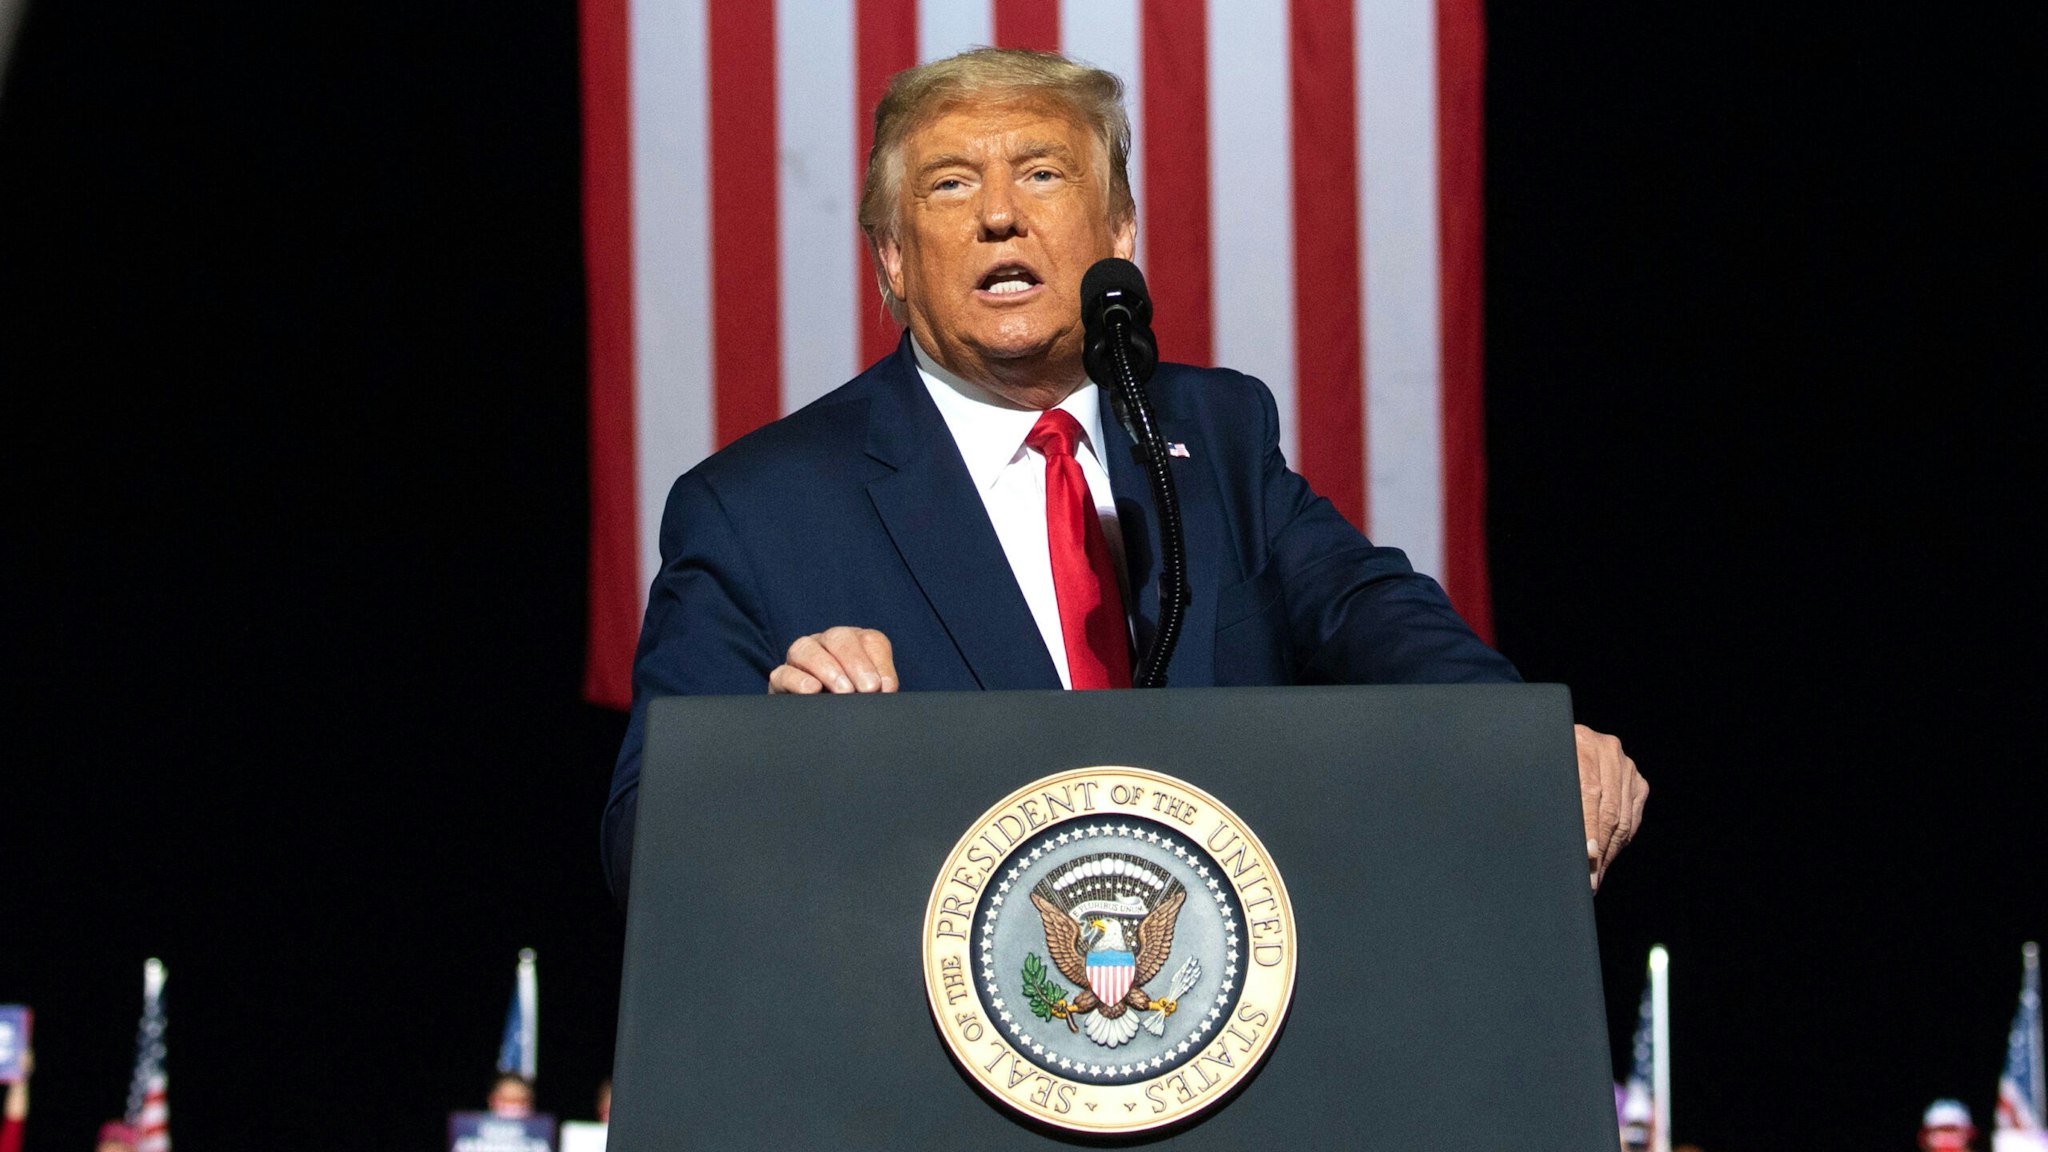 US President Donald Trump addresses supporters during a Make America Great Again rally as he campaigns in Gastonia, North Carolina, October 21, 2020.